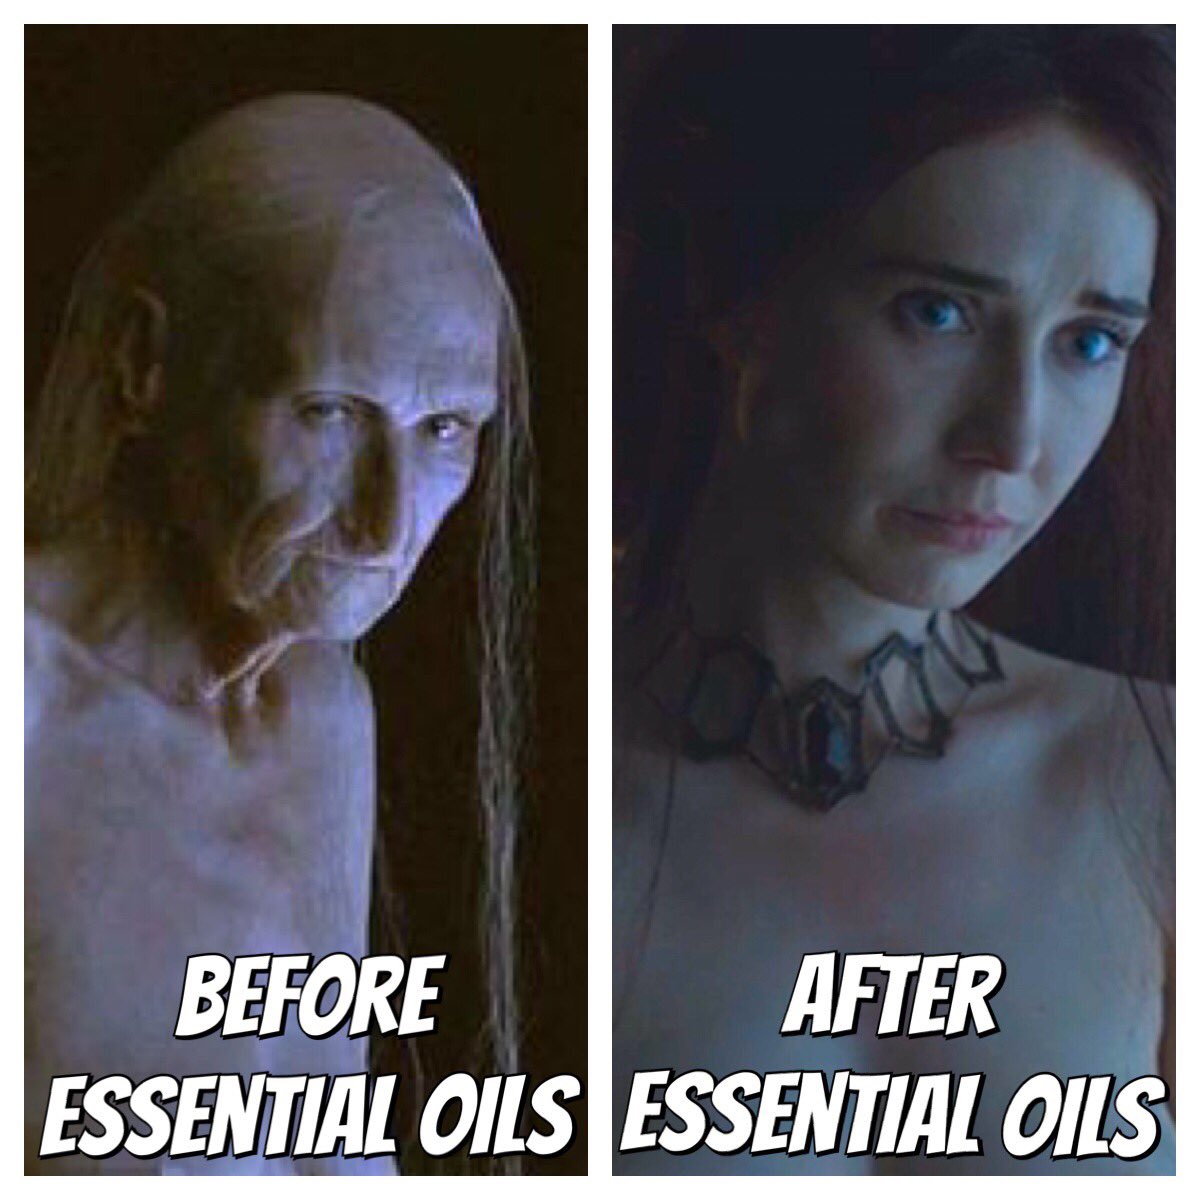 Essential oils really work!